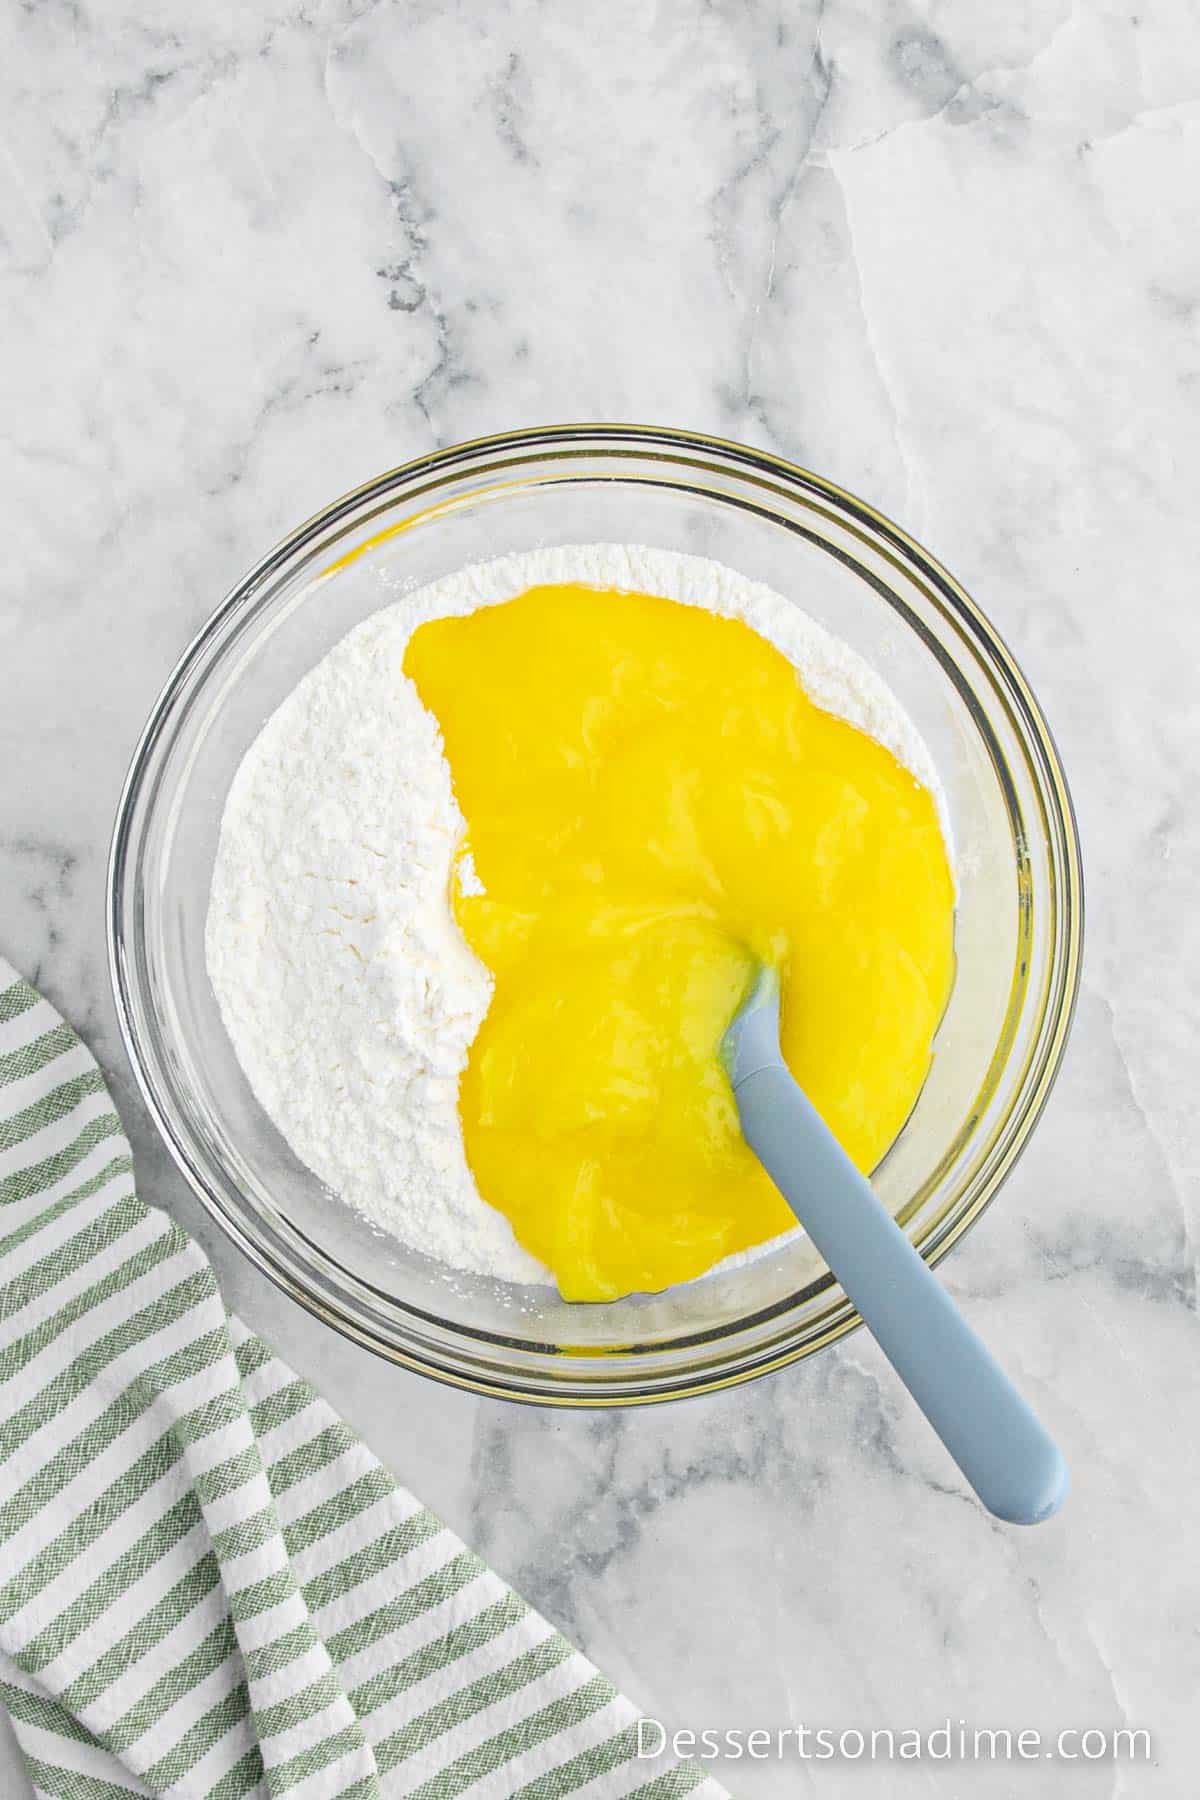 Combining the angel food cake with the lemon pie filling